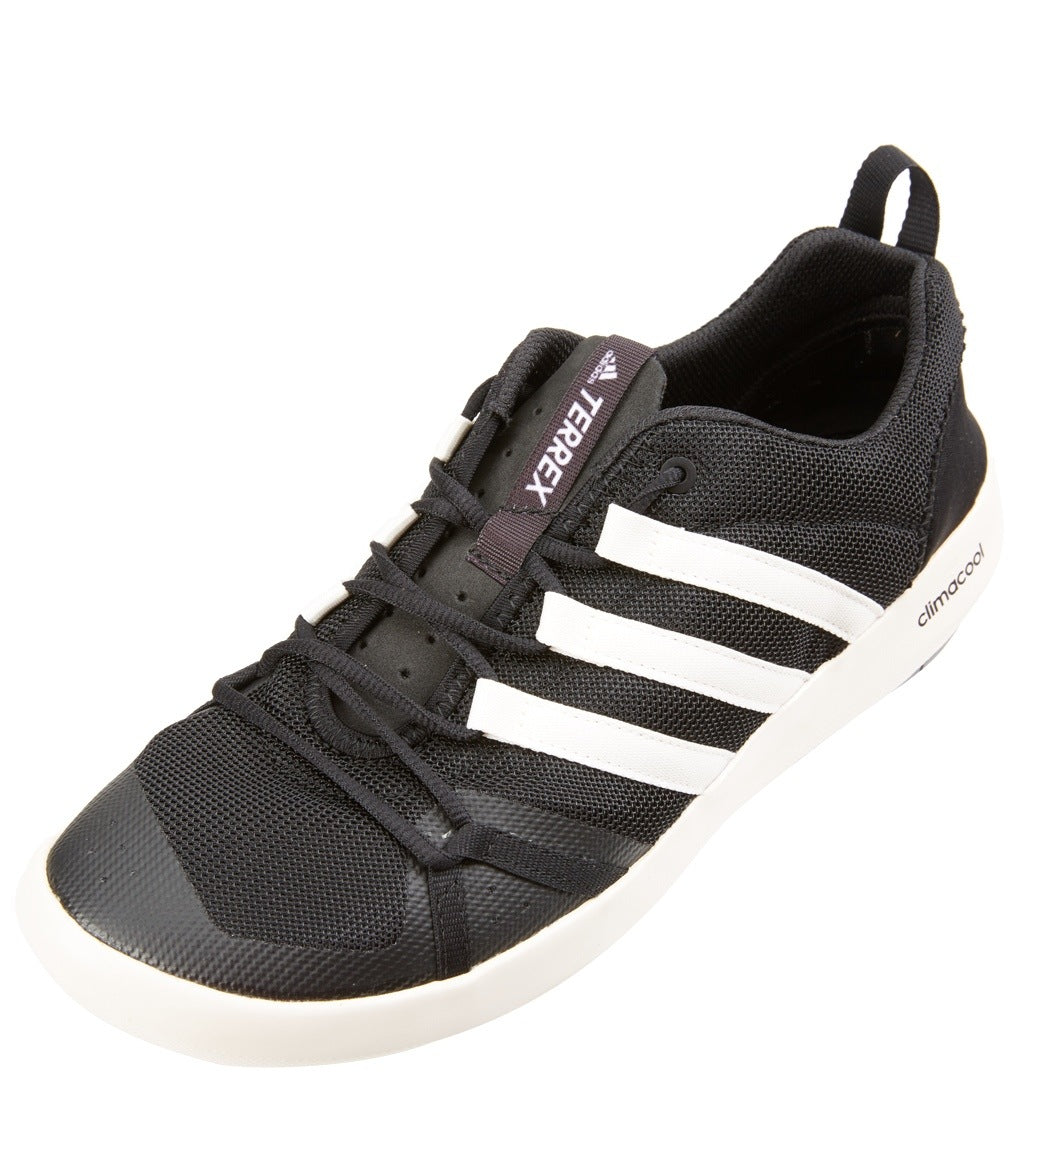 Adidas Climacool Boat Shoe at SwimOutlet.com